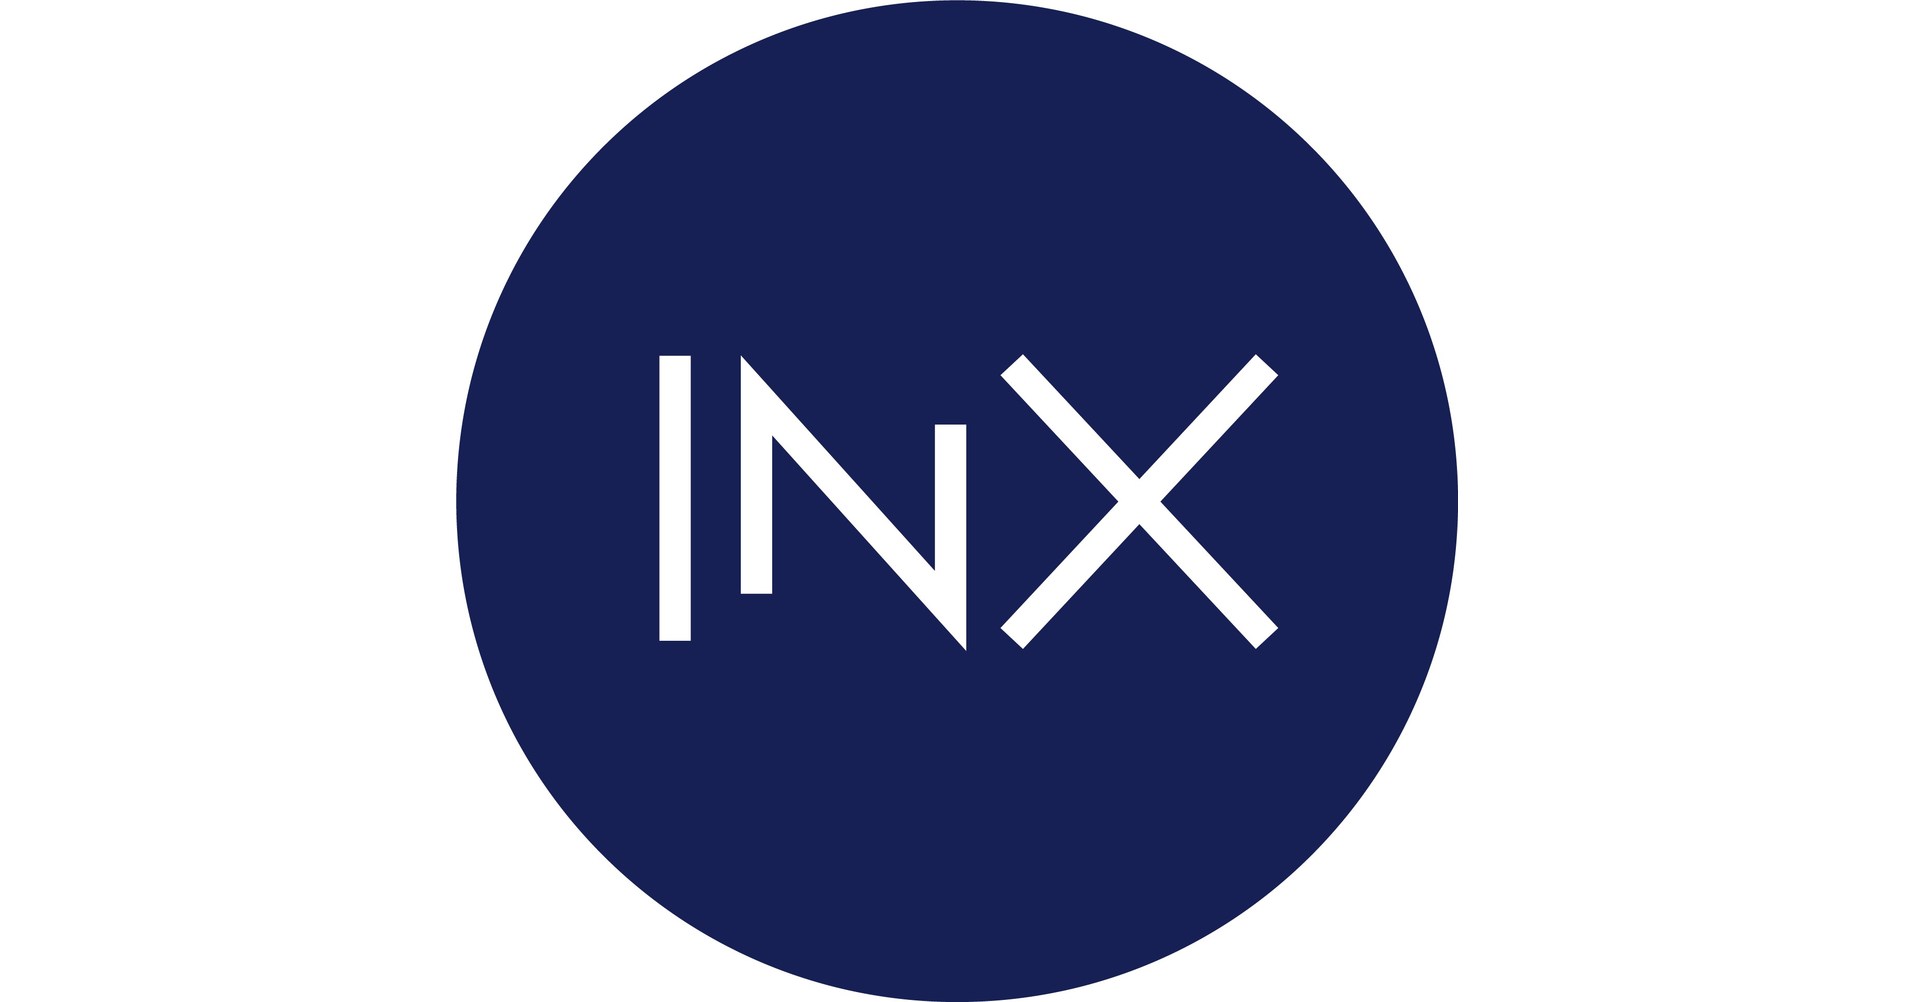 INX ANNOUNCES INTEGRATION WITH POLYGON